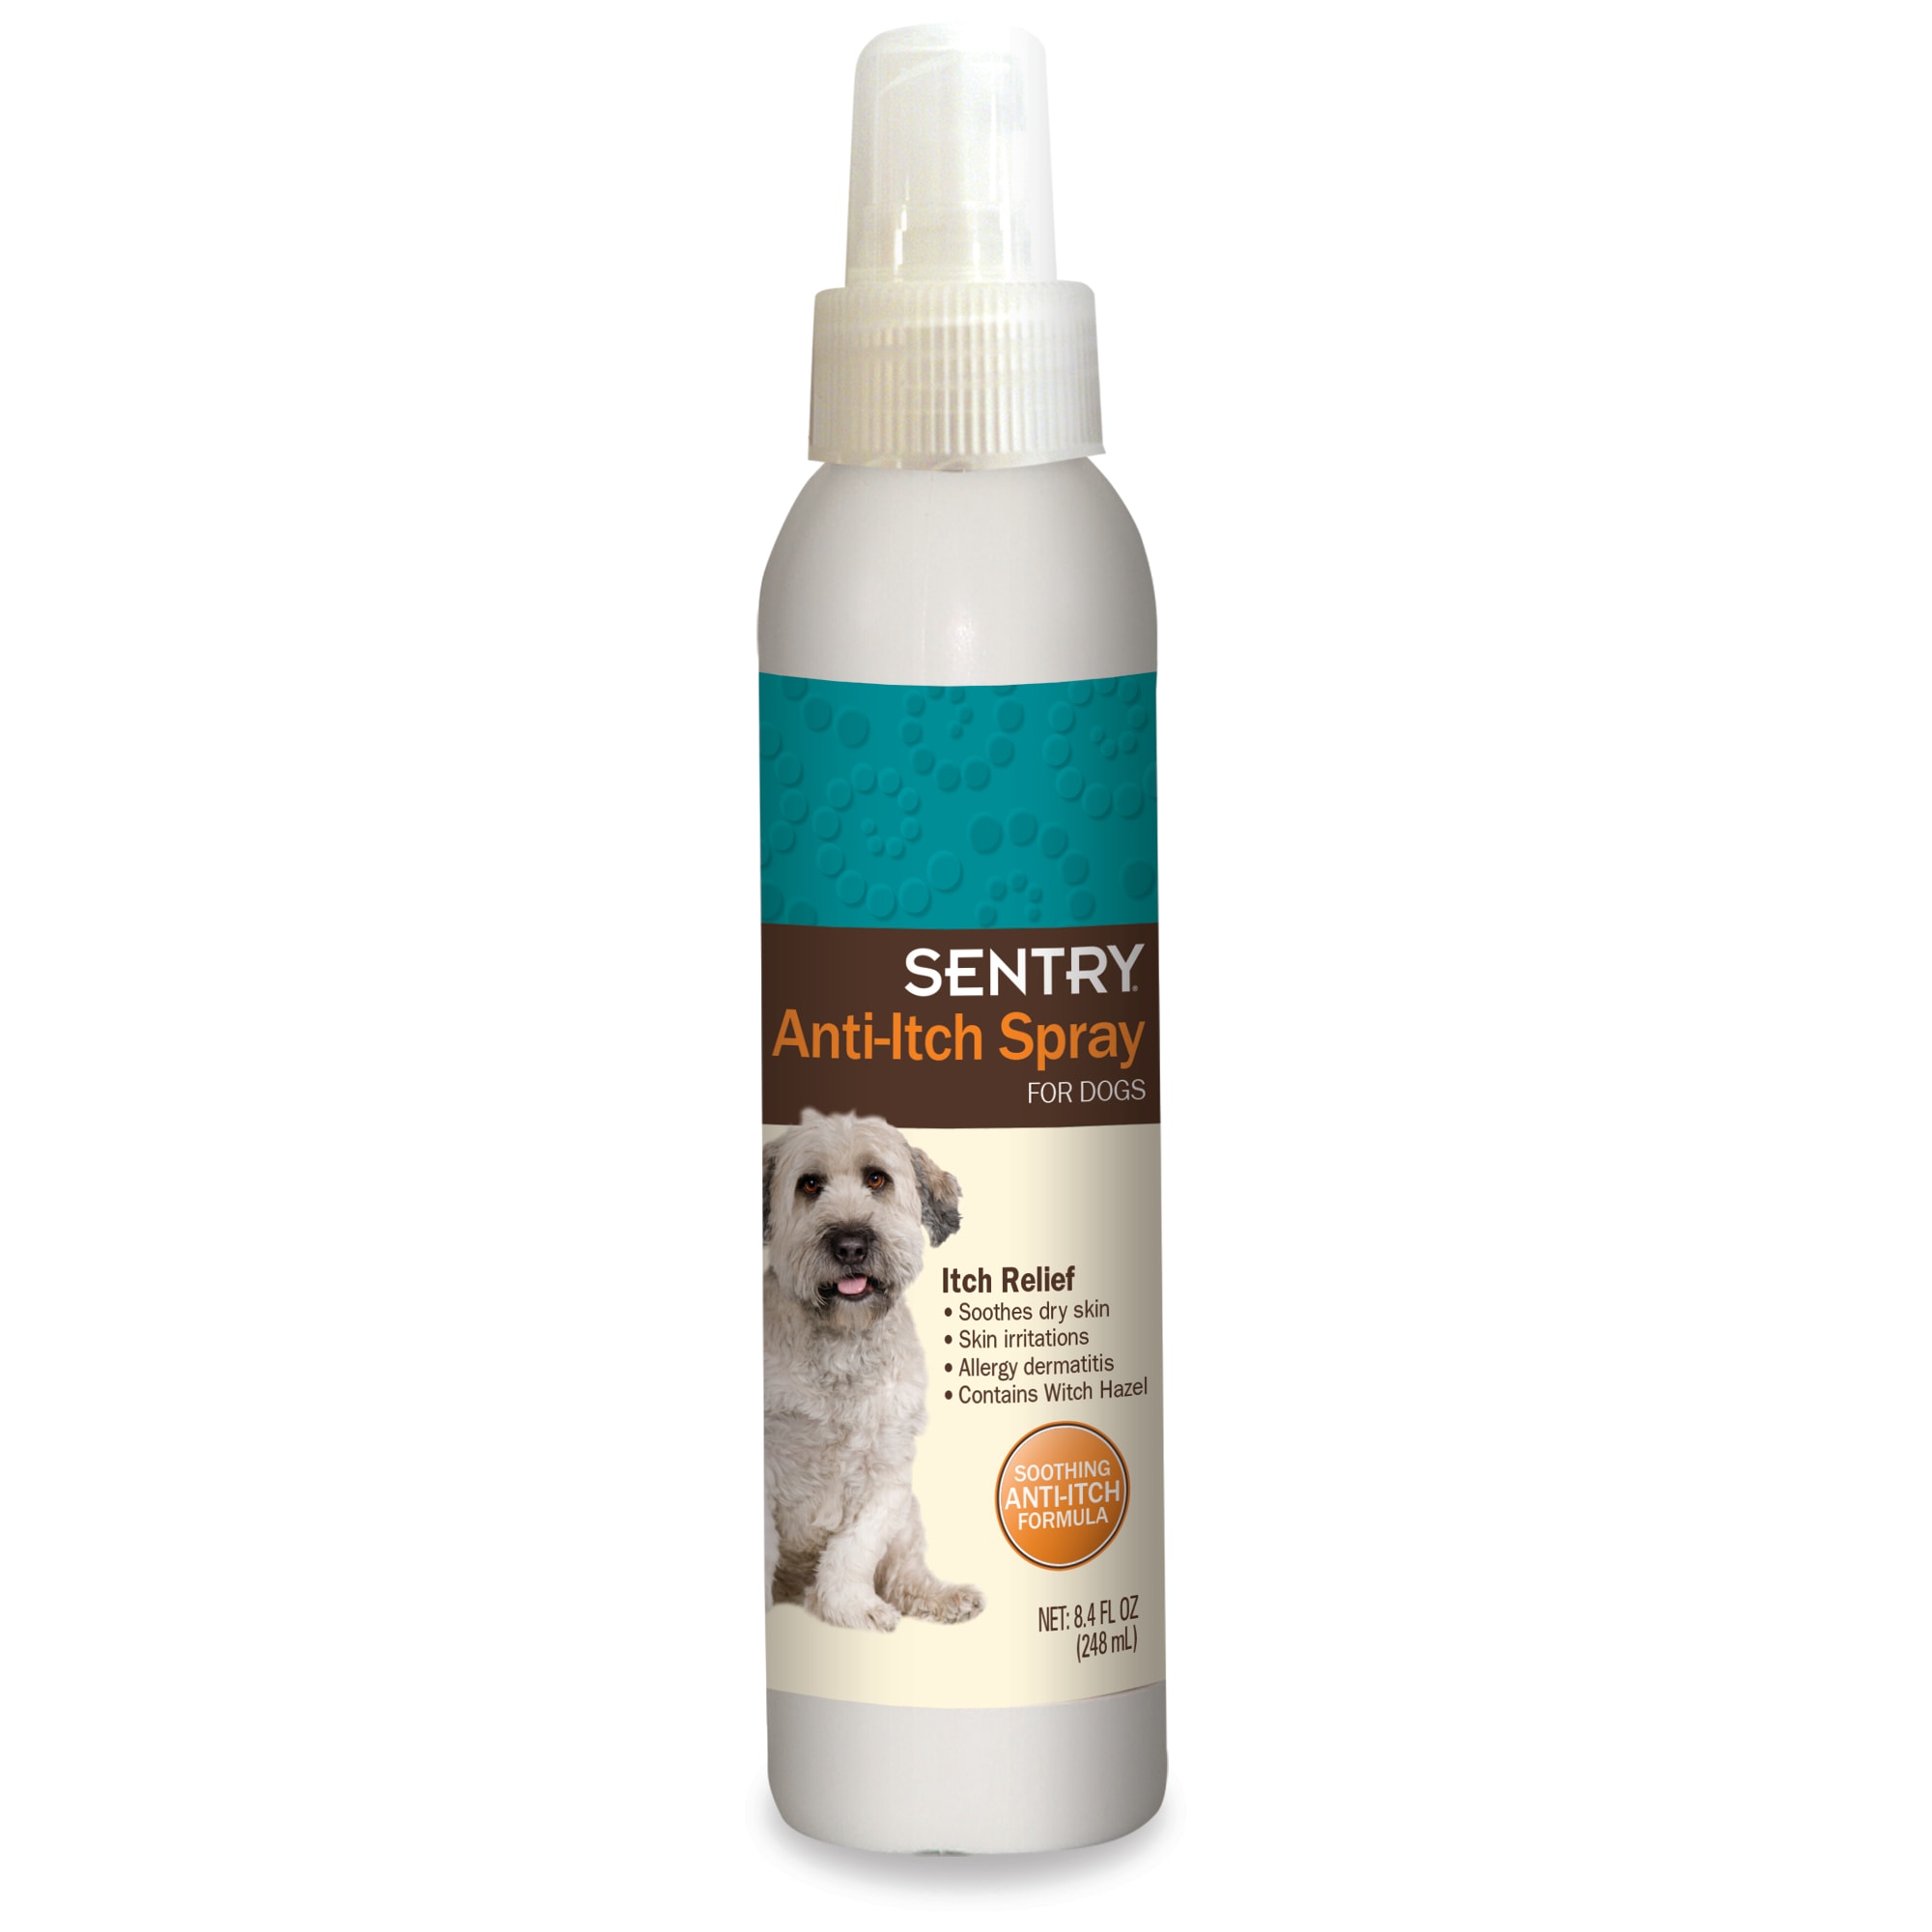 itch soothing for dogs